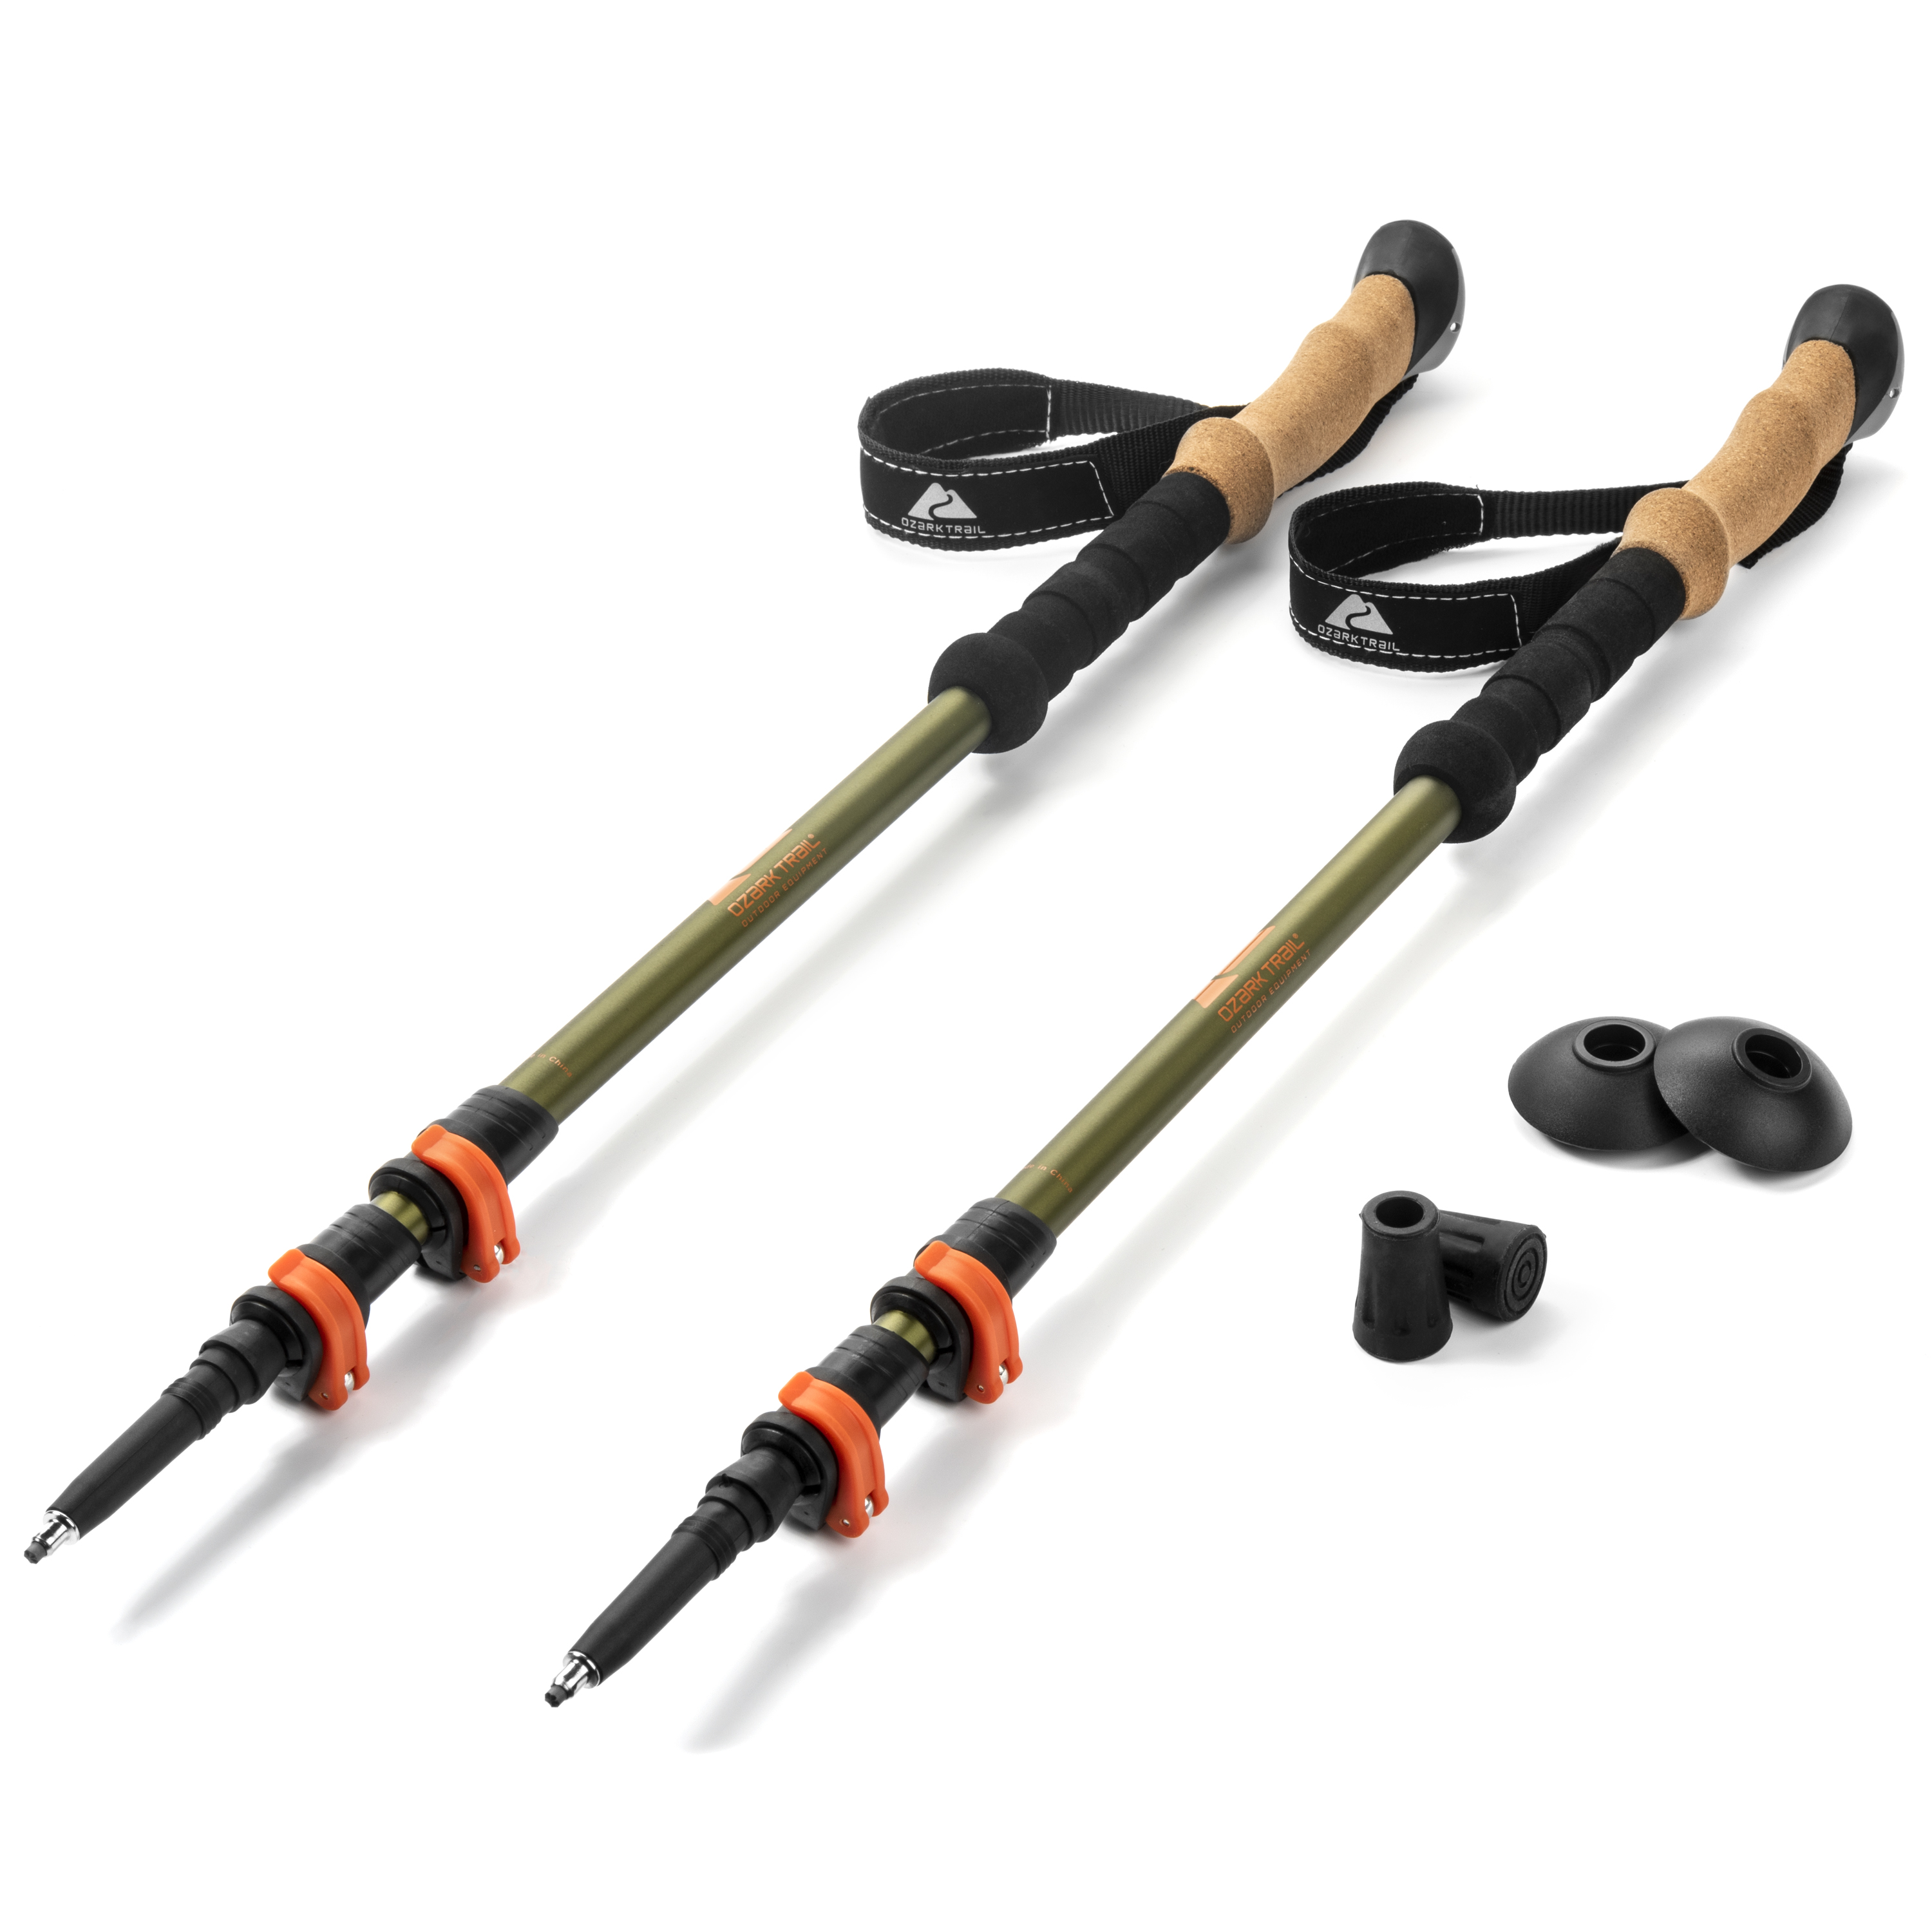 1 Pair//Alpenstock//Lightweight Aluminum Hiking Sticks // Walking Trekking Poles // Quick-Lock Design easy to pack into the Mountaineering Back Bag // Snow baskets included Ultralight for Walking Hiking Horizon Outdoor 7075 Aluminum Folding Trekking Poles